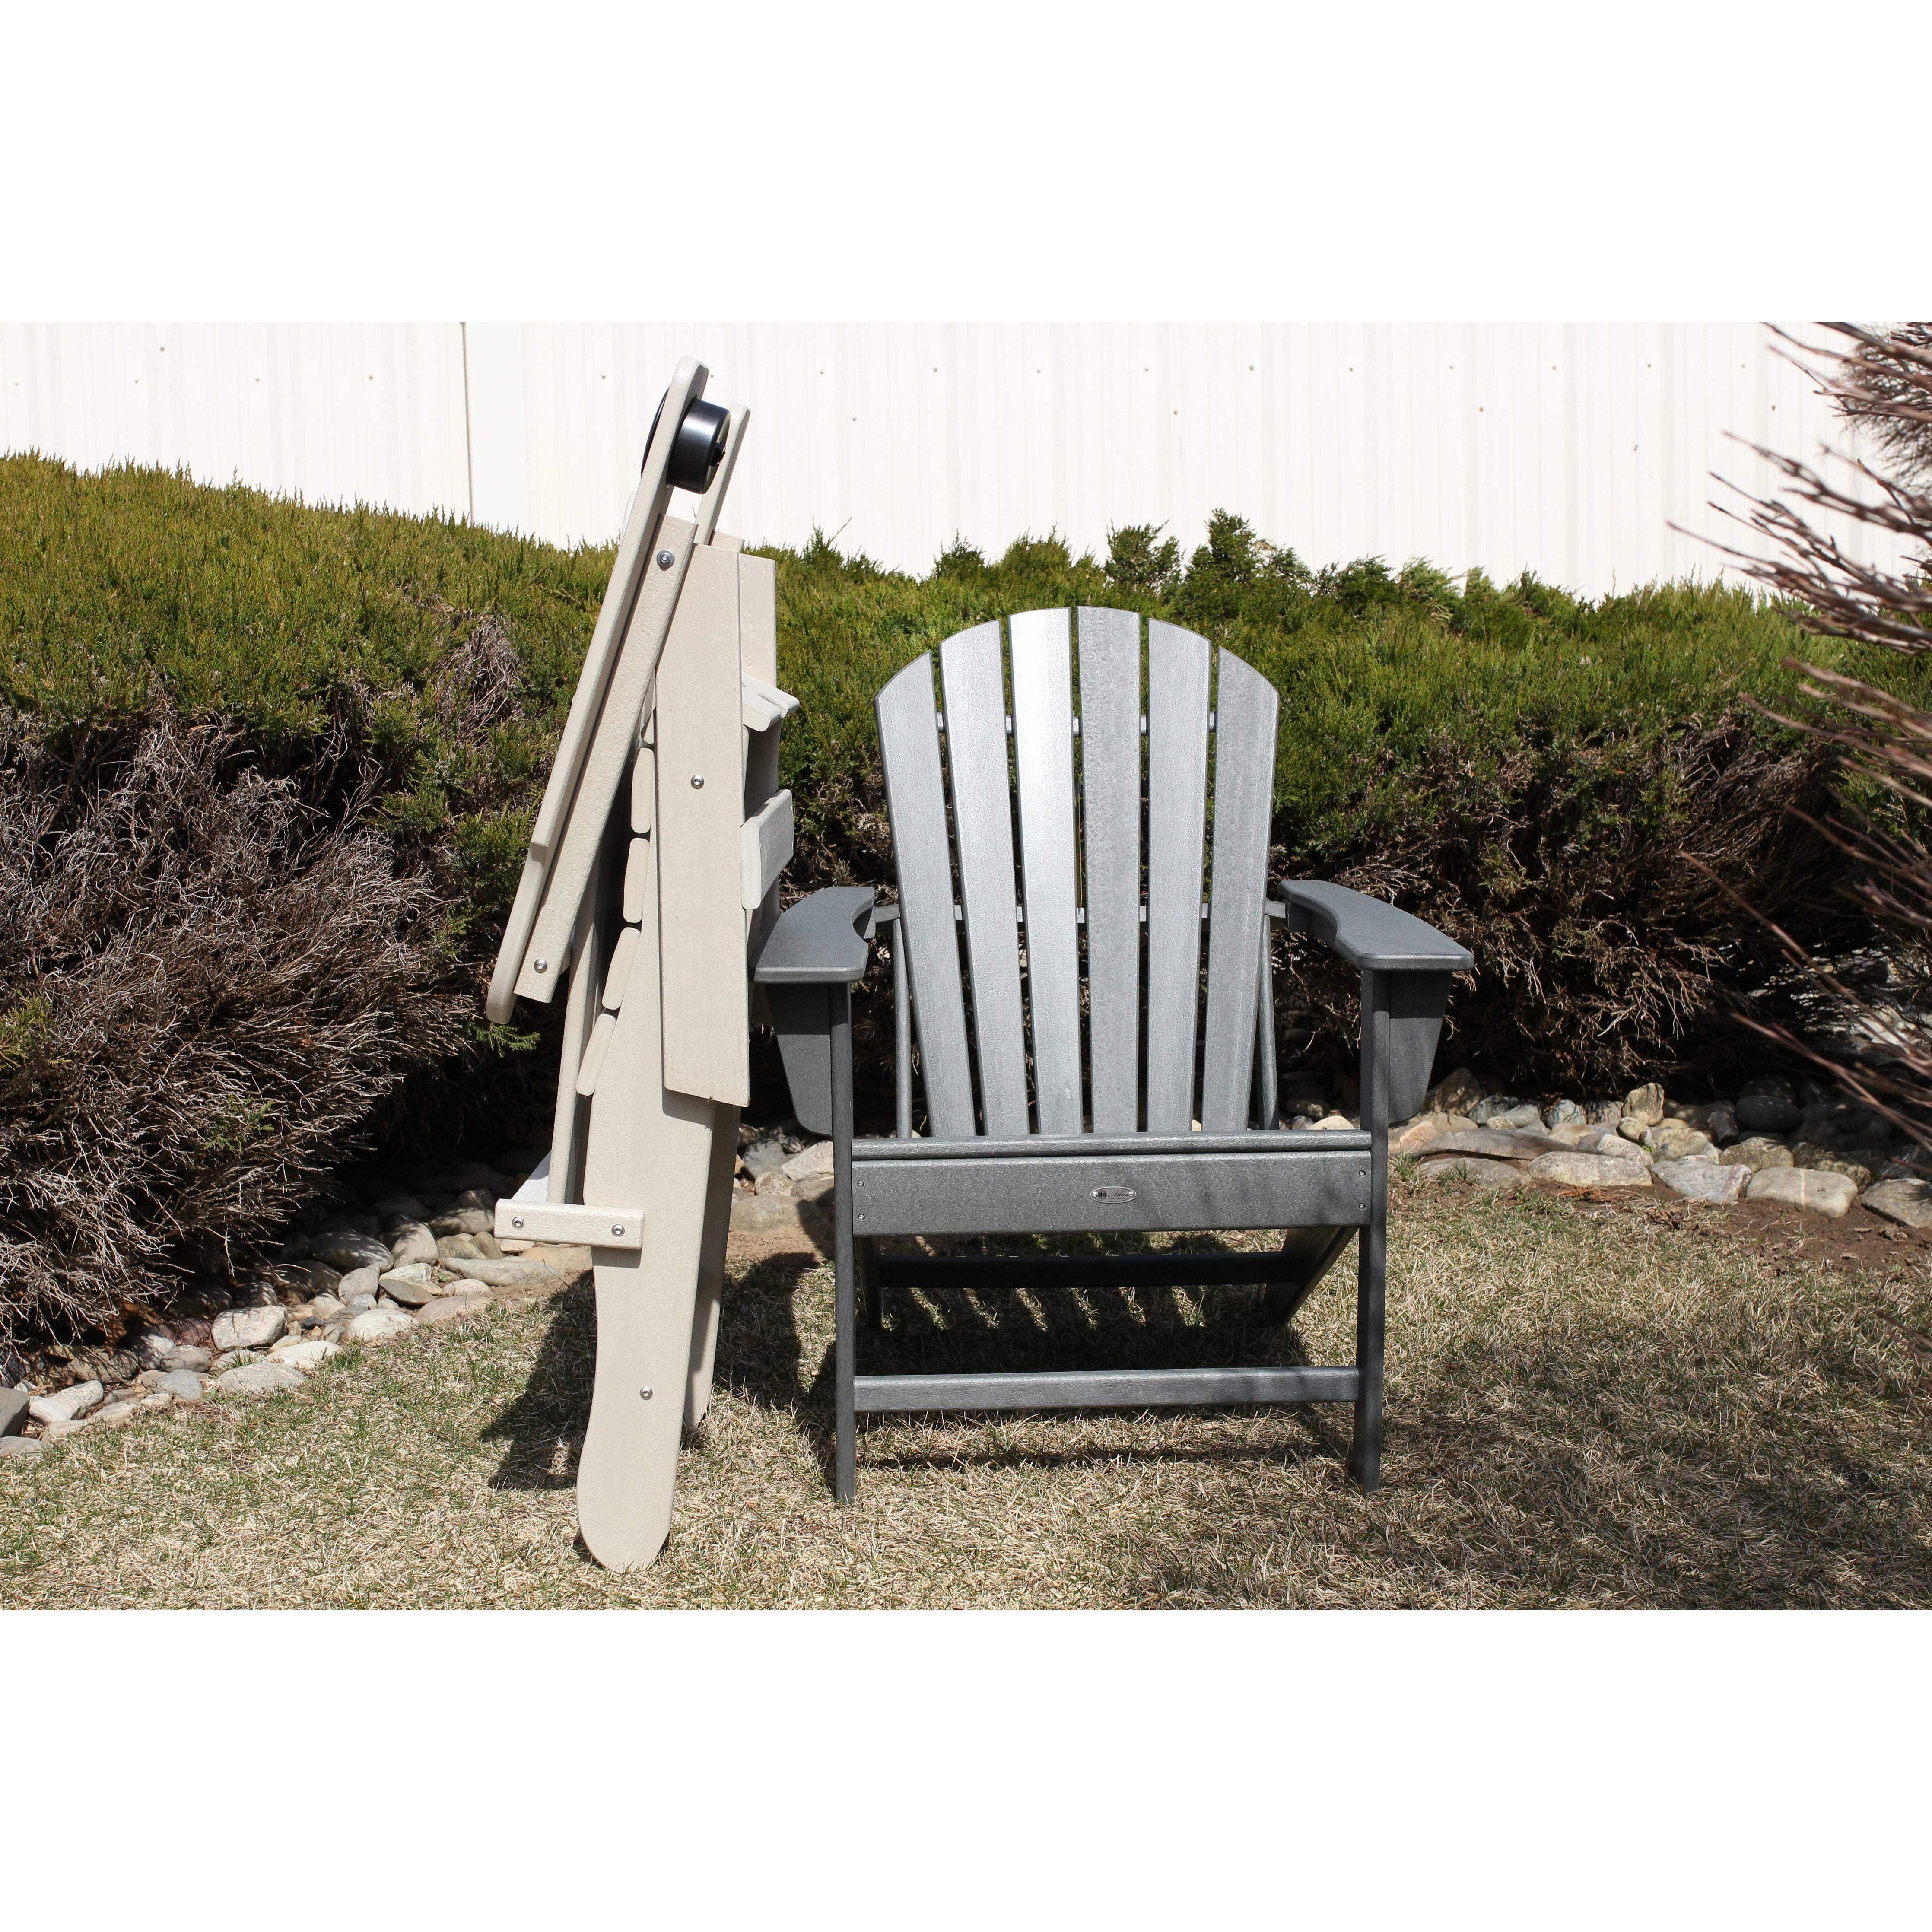 Beach Haven Folding Adirondack Chair With Cupholder (Tan) - Polymer Furniture IN STOCK